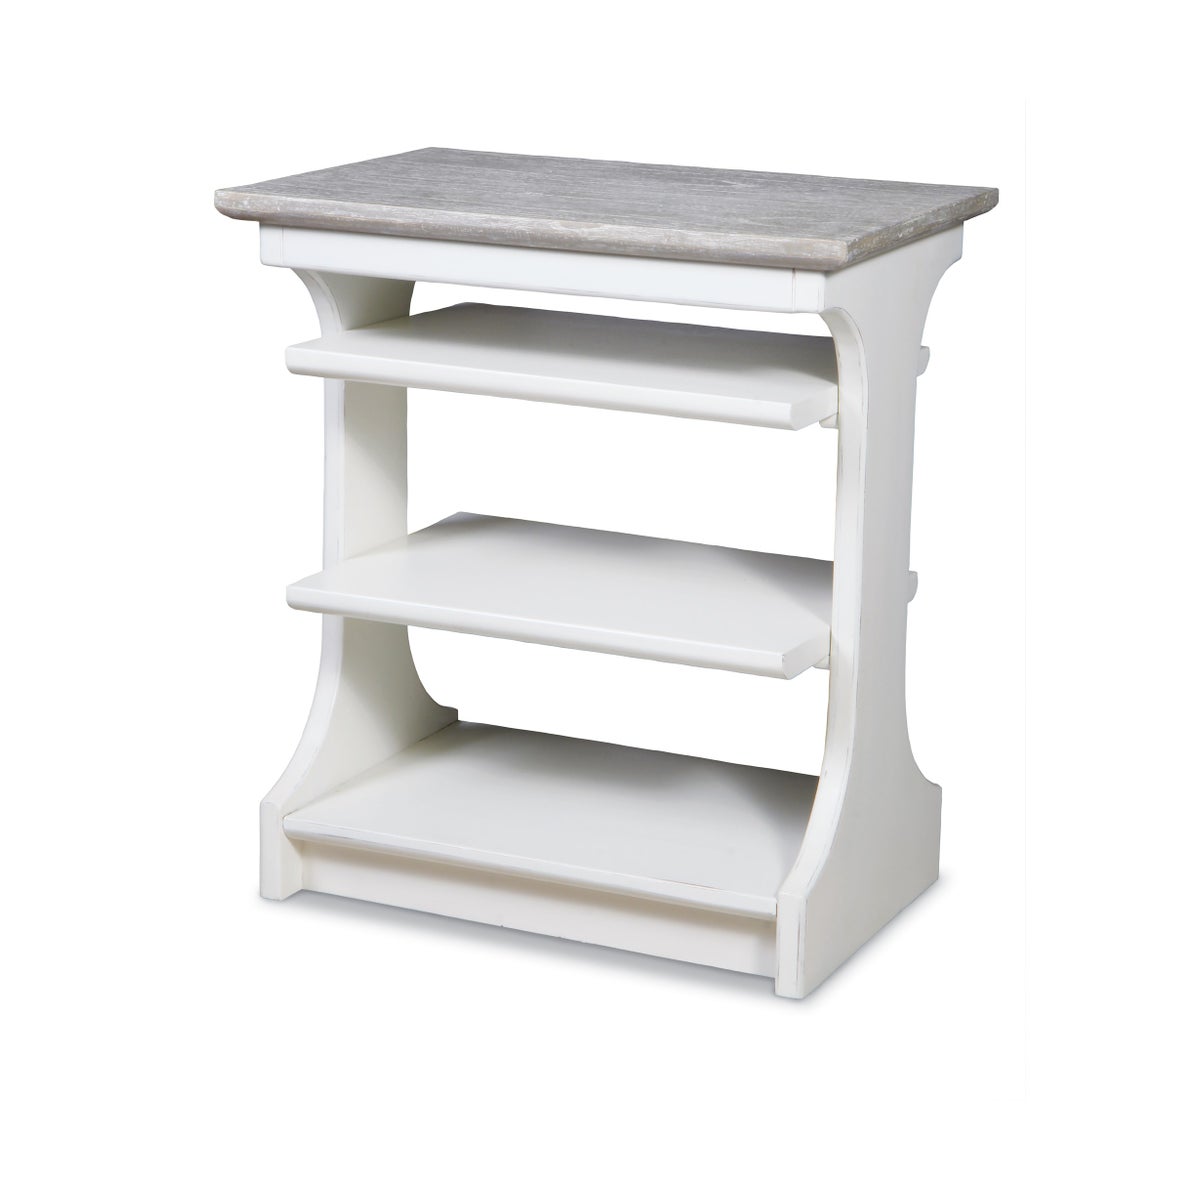 KENNEDY CHAIRSIDE TABLE - WH/RW+